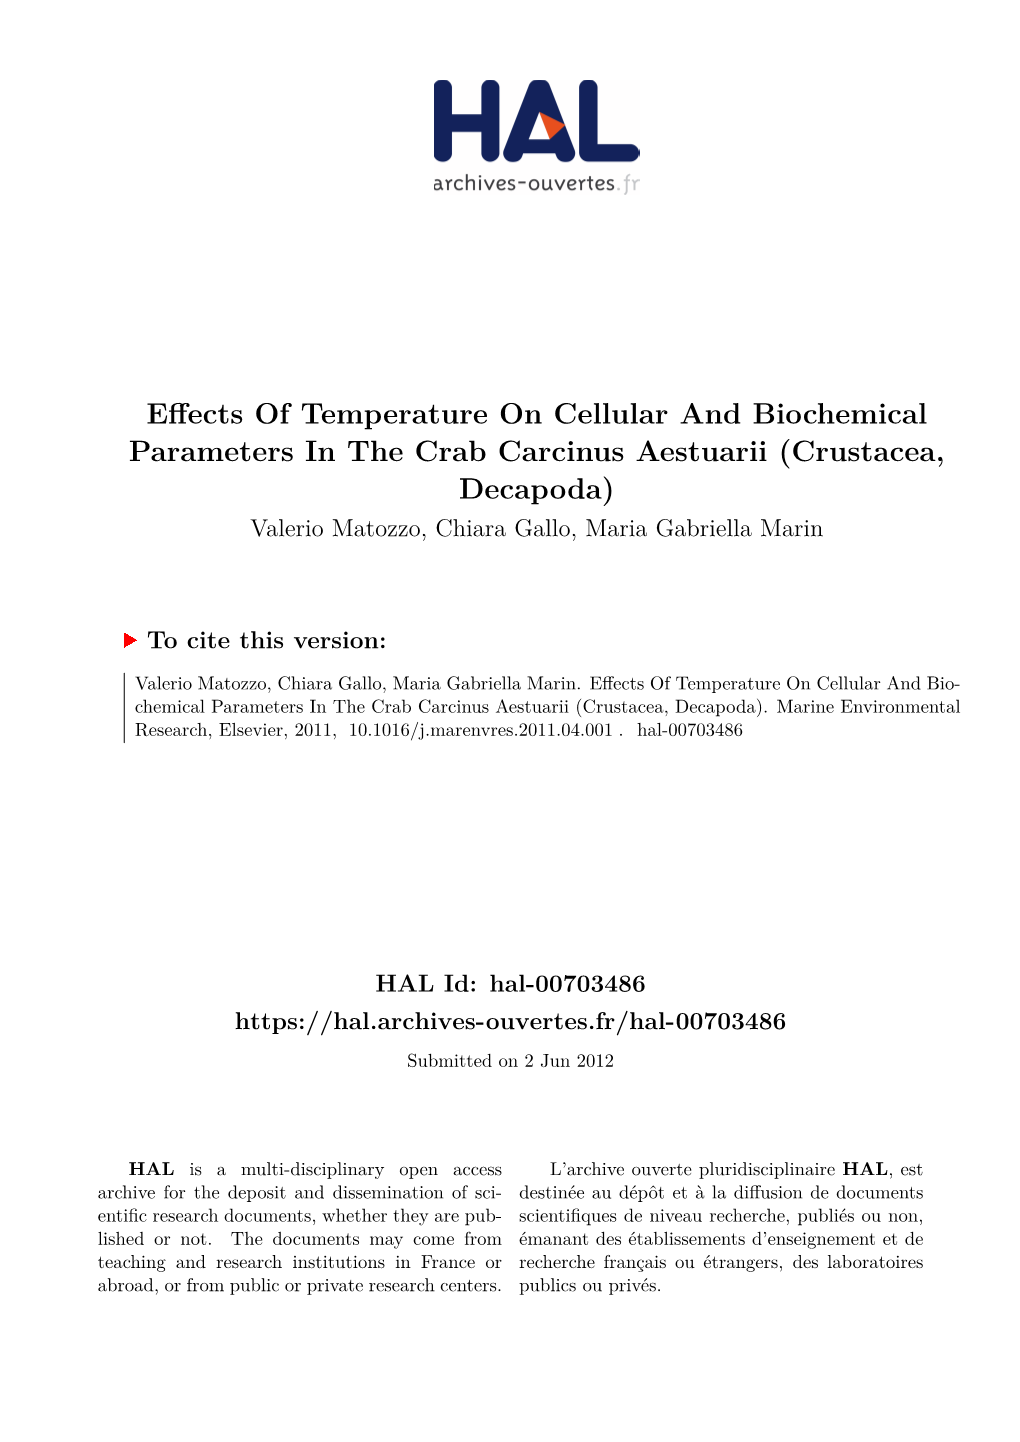 Effects of Temperature on Cellular and Biochemical Parameters in The